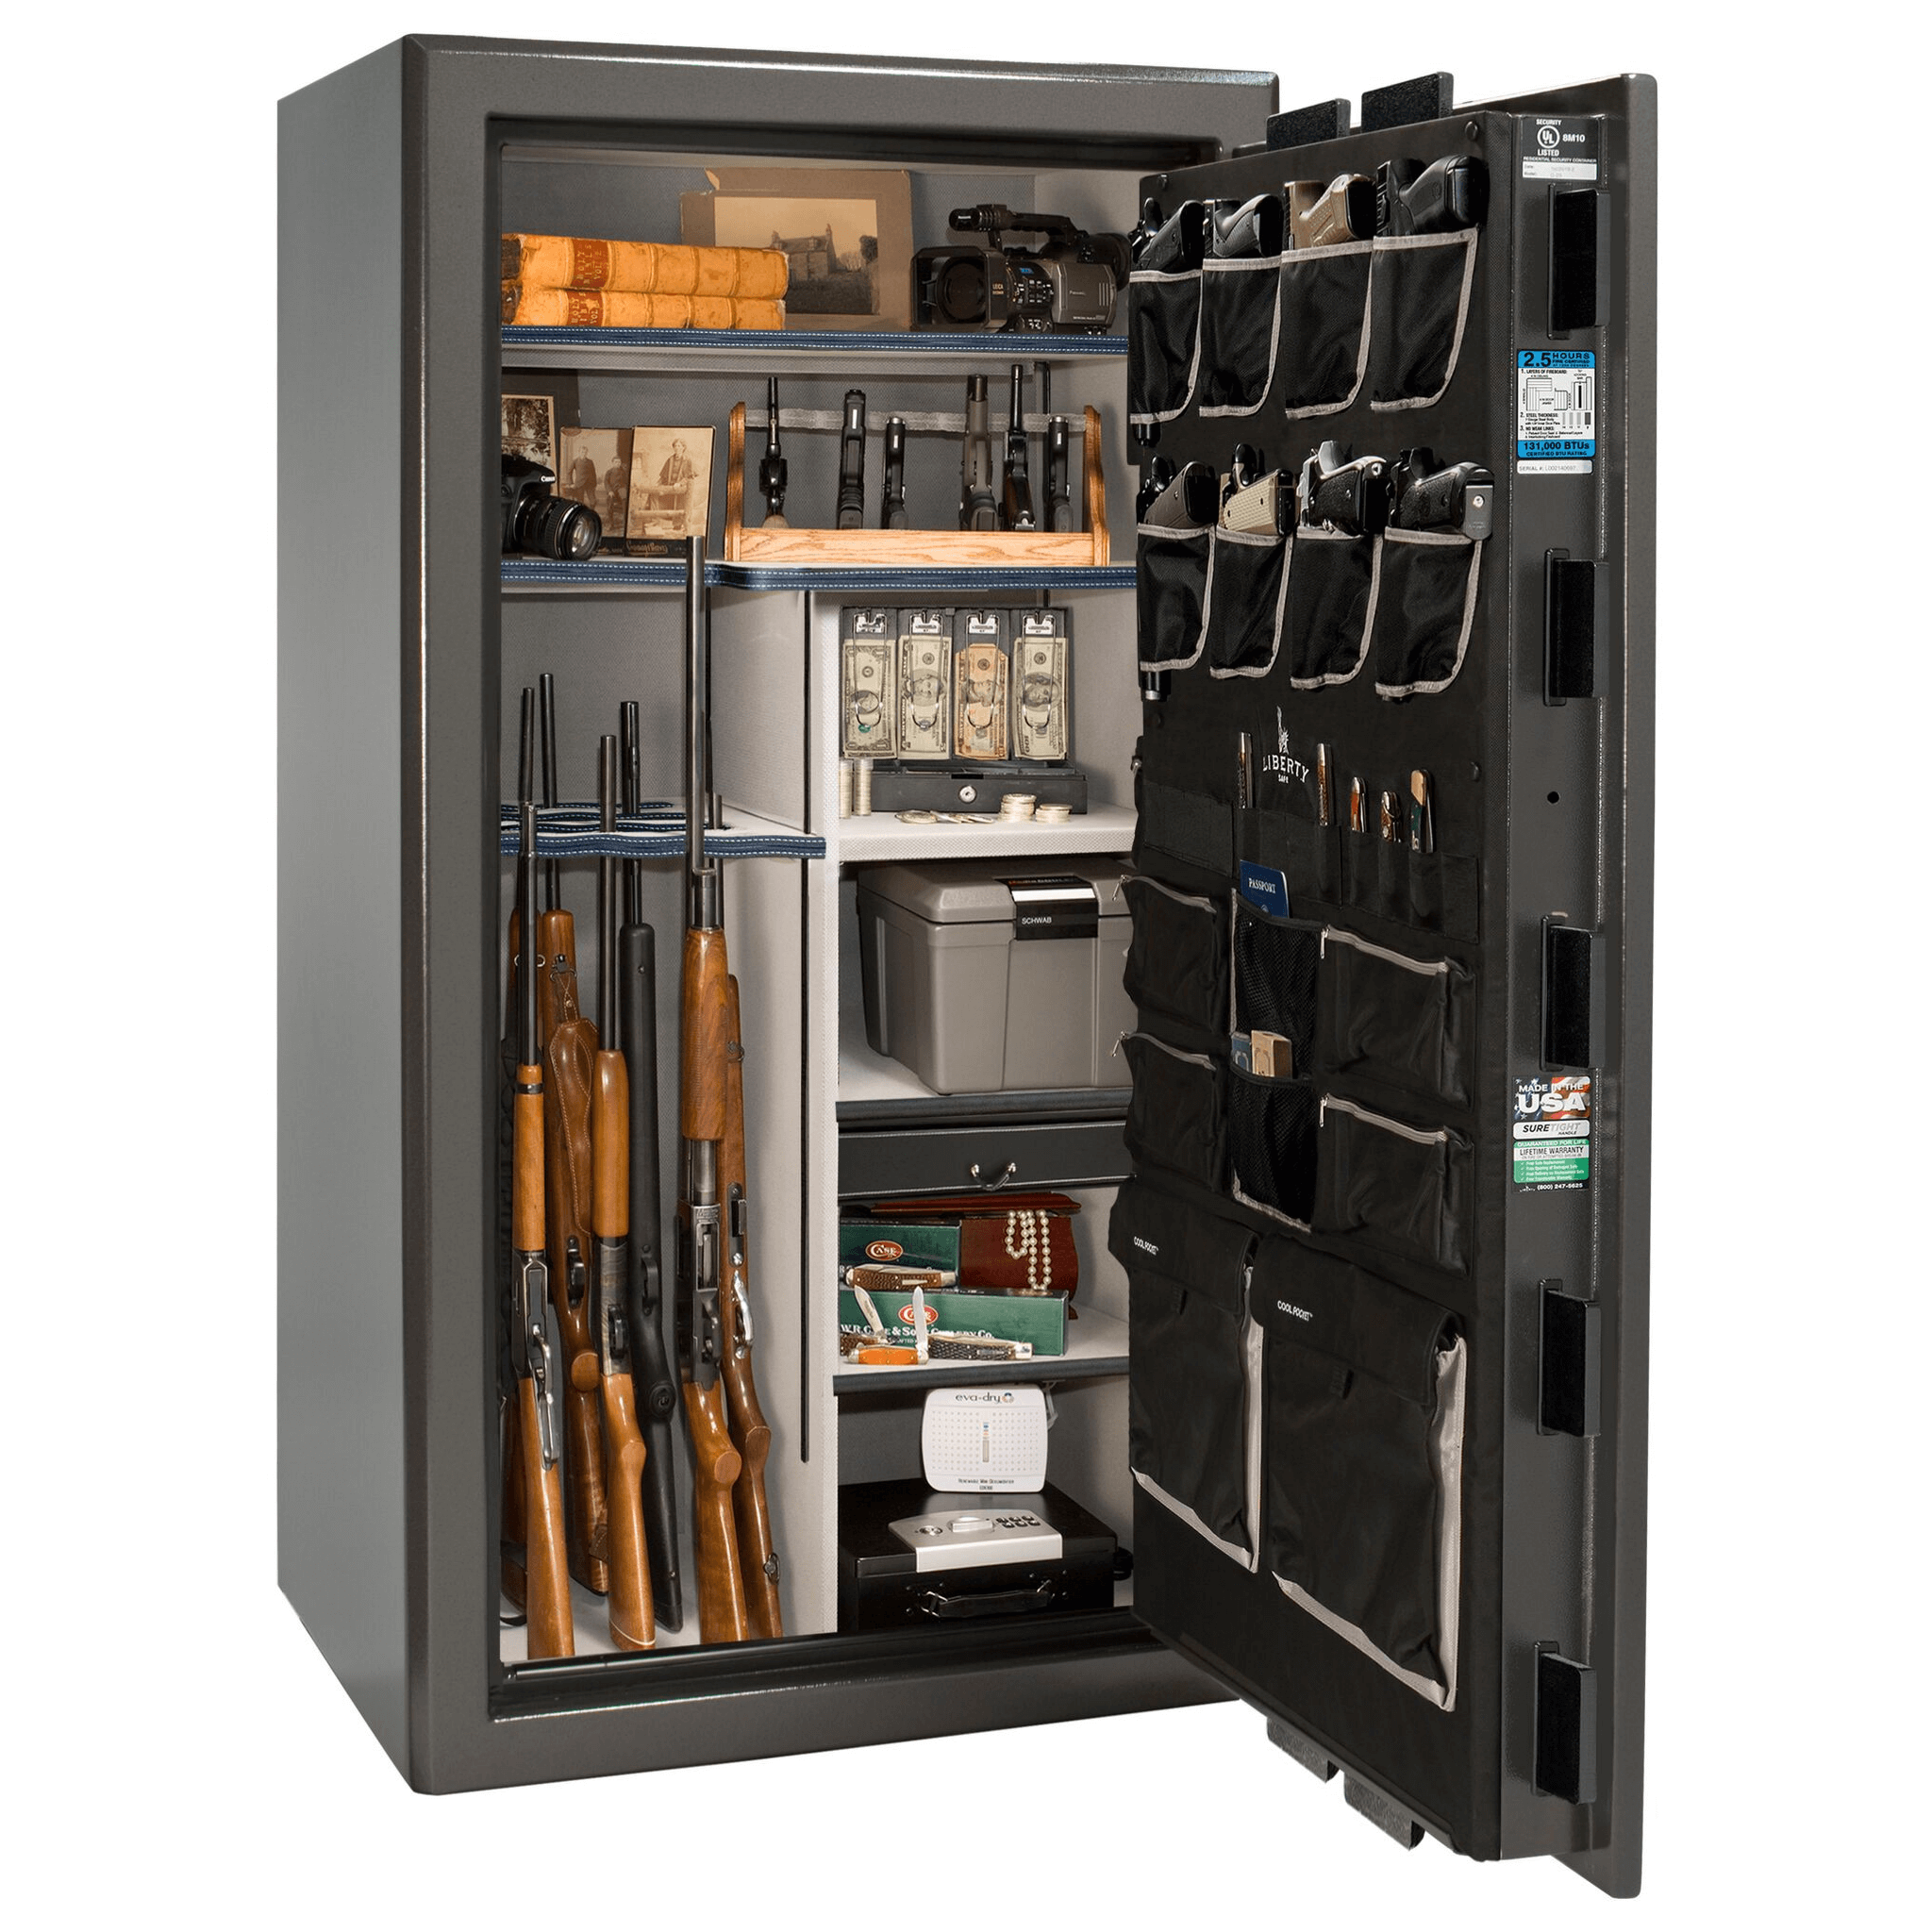 Presidential Series | Level 8 Security | 2.5 Hours Fire Protection | 40 | Dimensions: 66.5"(H) x 36.25"(W) x 32"(D) | Gray Marble | Black Chrome Hardware | Mechanical Lock